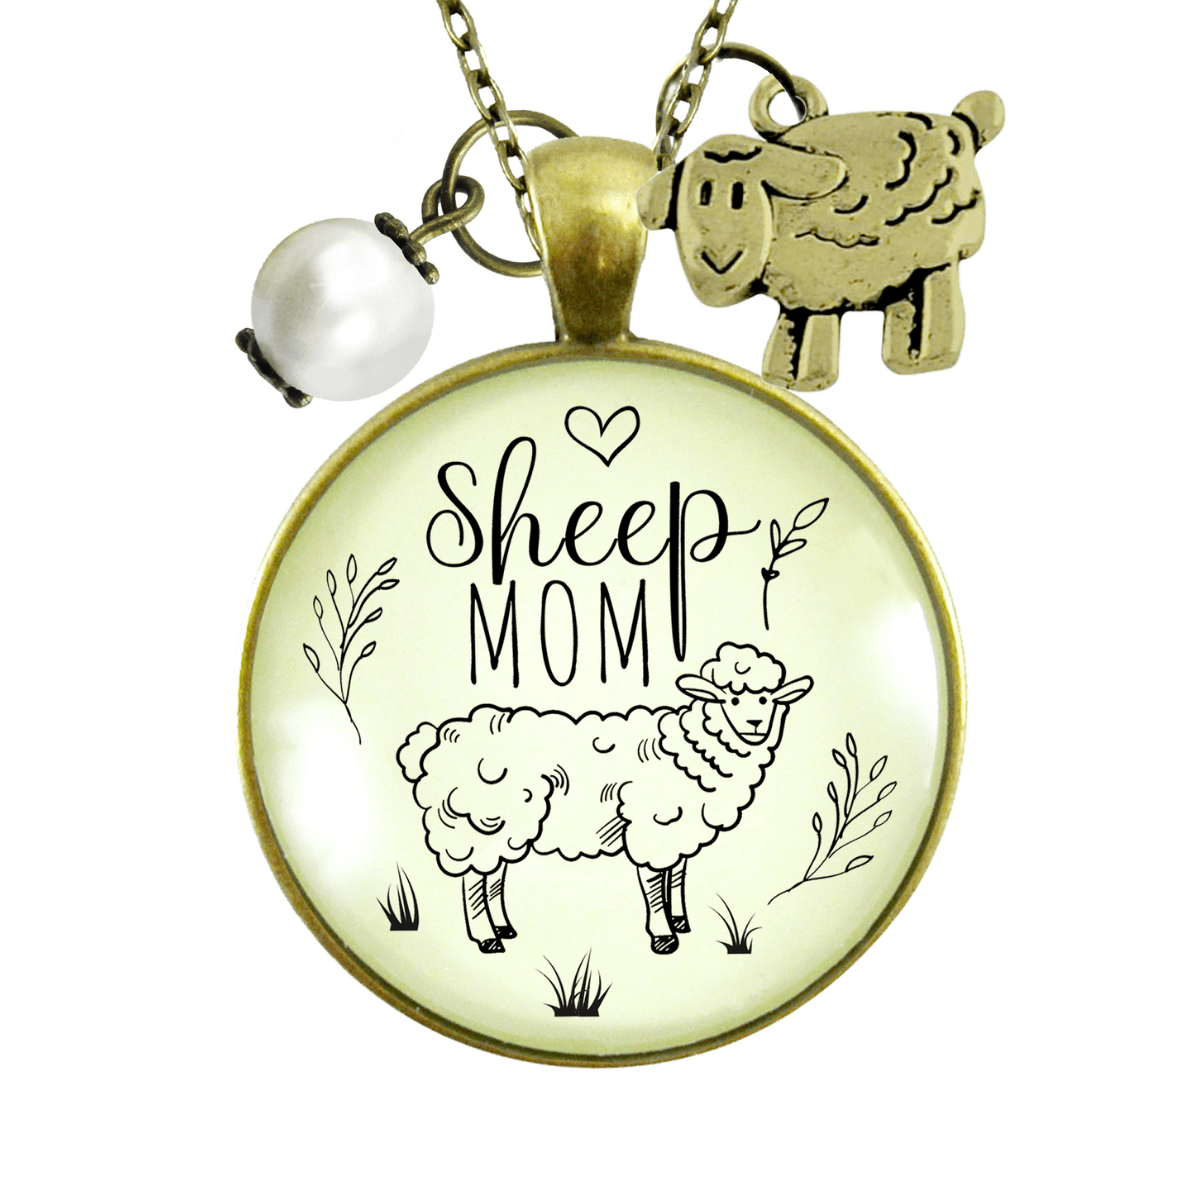 Gutsy Goodness Sheep Mom Necklace Farm Animal Vintage Style Quote Jewelry - Gutsy Goodness;Sheep Mom Necklace Farm Animal Vintage Style Quote Jewelry - Gutsy Goodness Handmade Jewelry Gifts